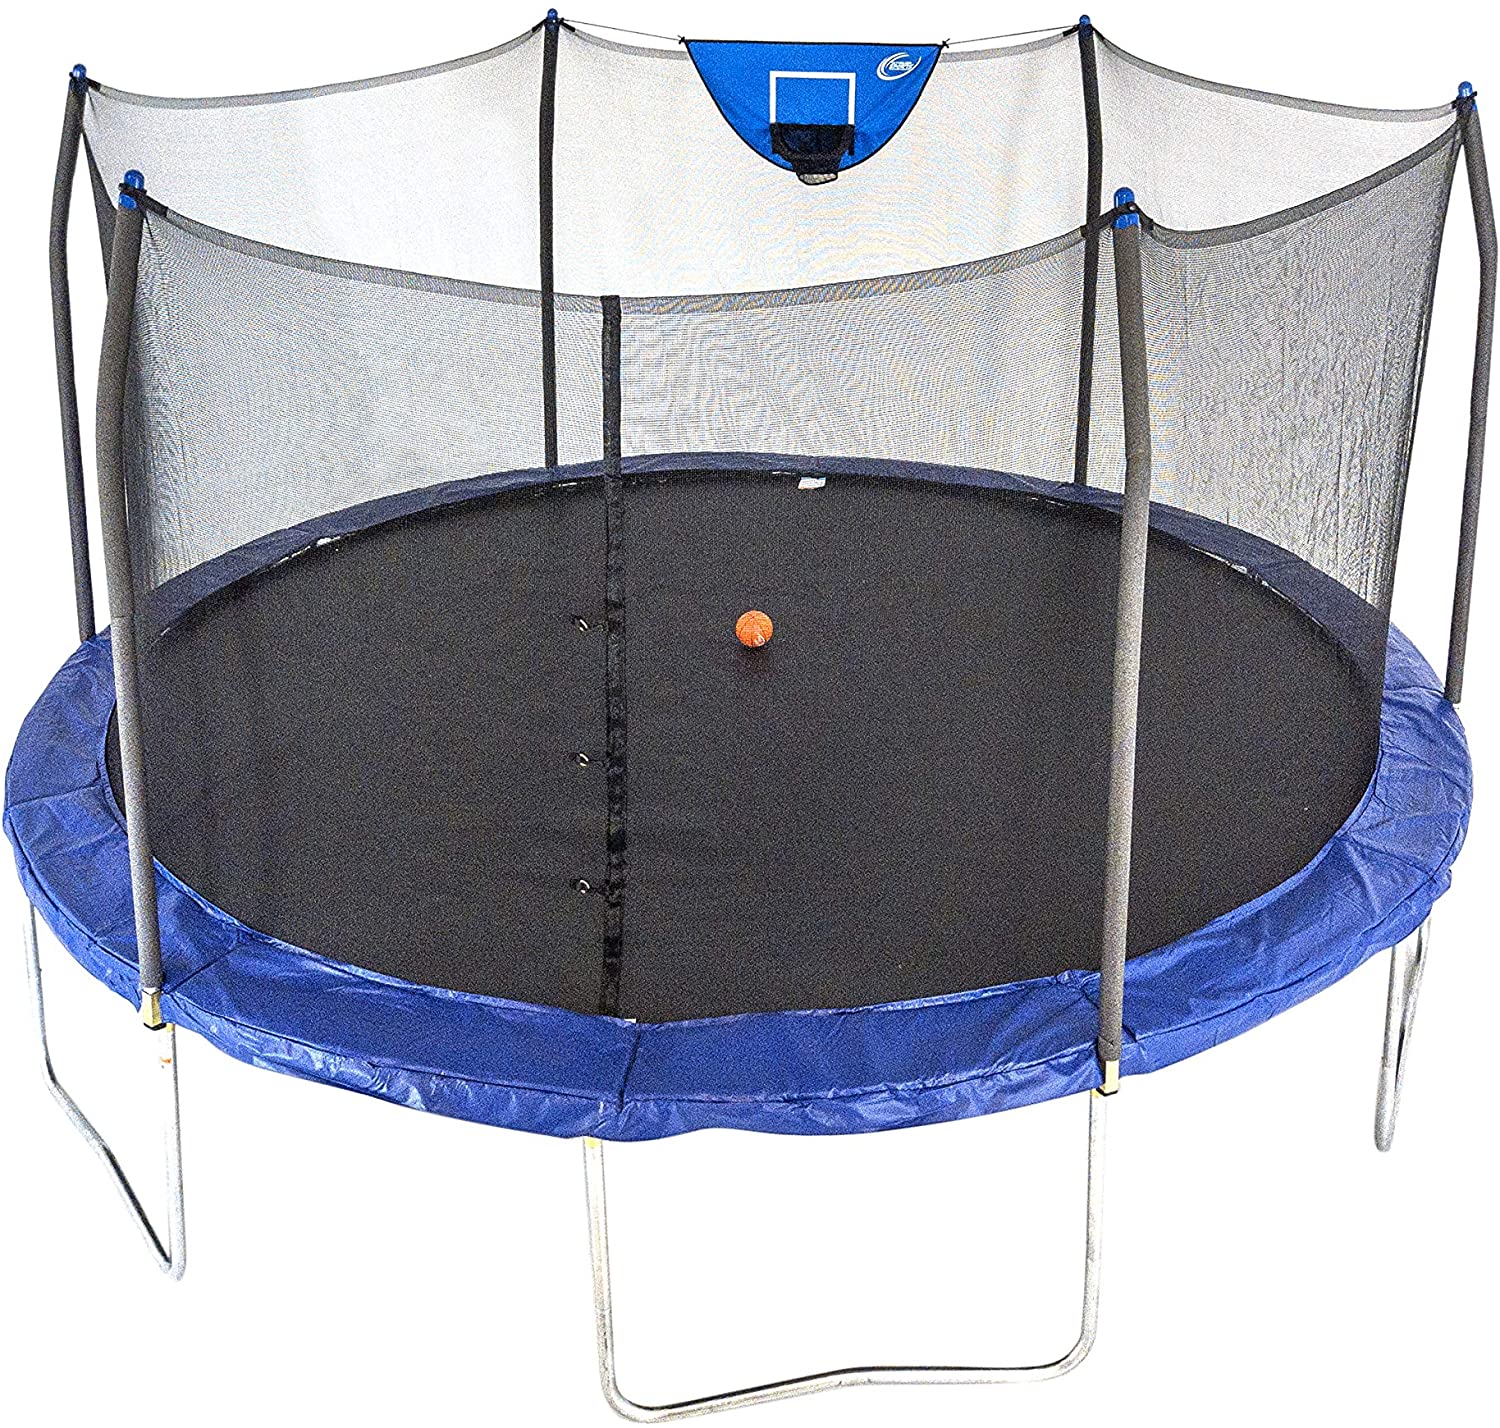 Skywalker 15-Feet Jump N’ Dunk Trampolines Blue with Safety Enclosure and Basketball Hoop